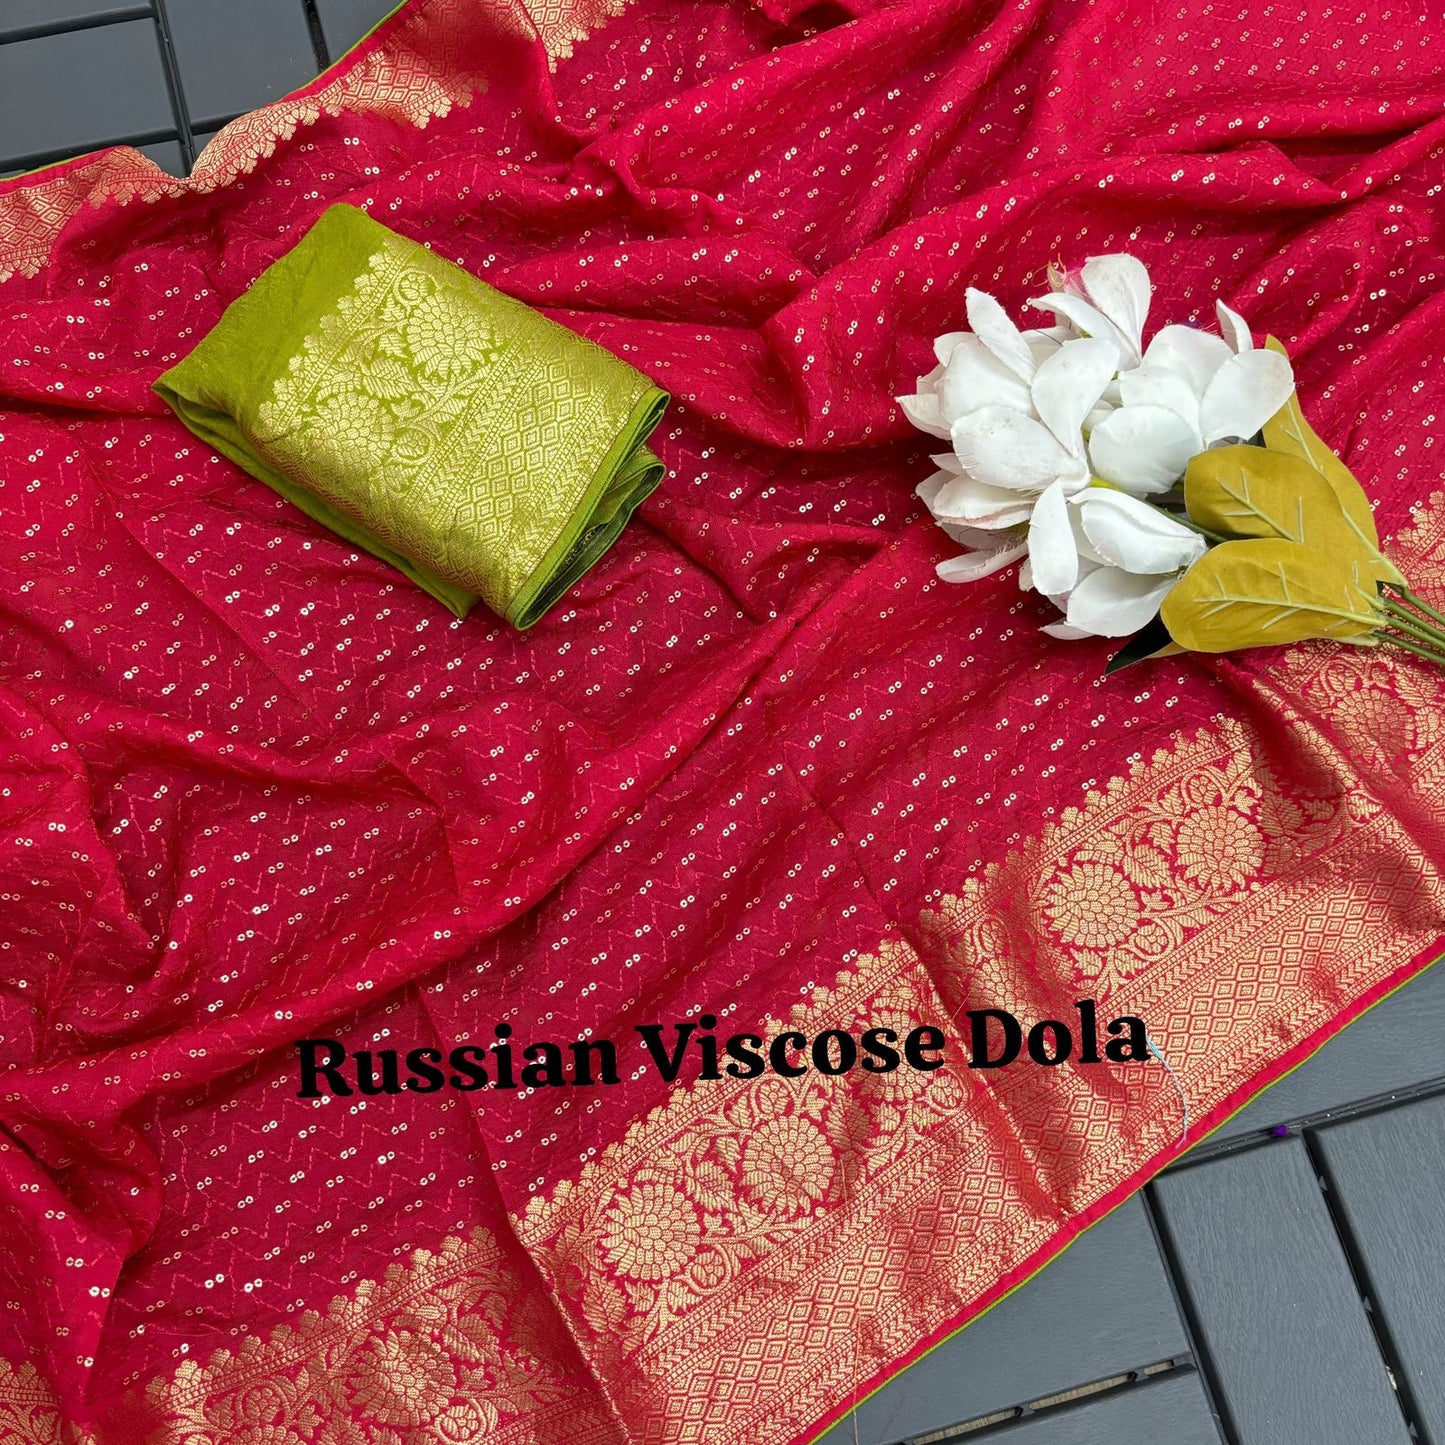 Pure Red Viscose Russian Dola With Jacquard Border Sequence Viscose Thread Embroidery work